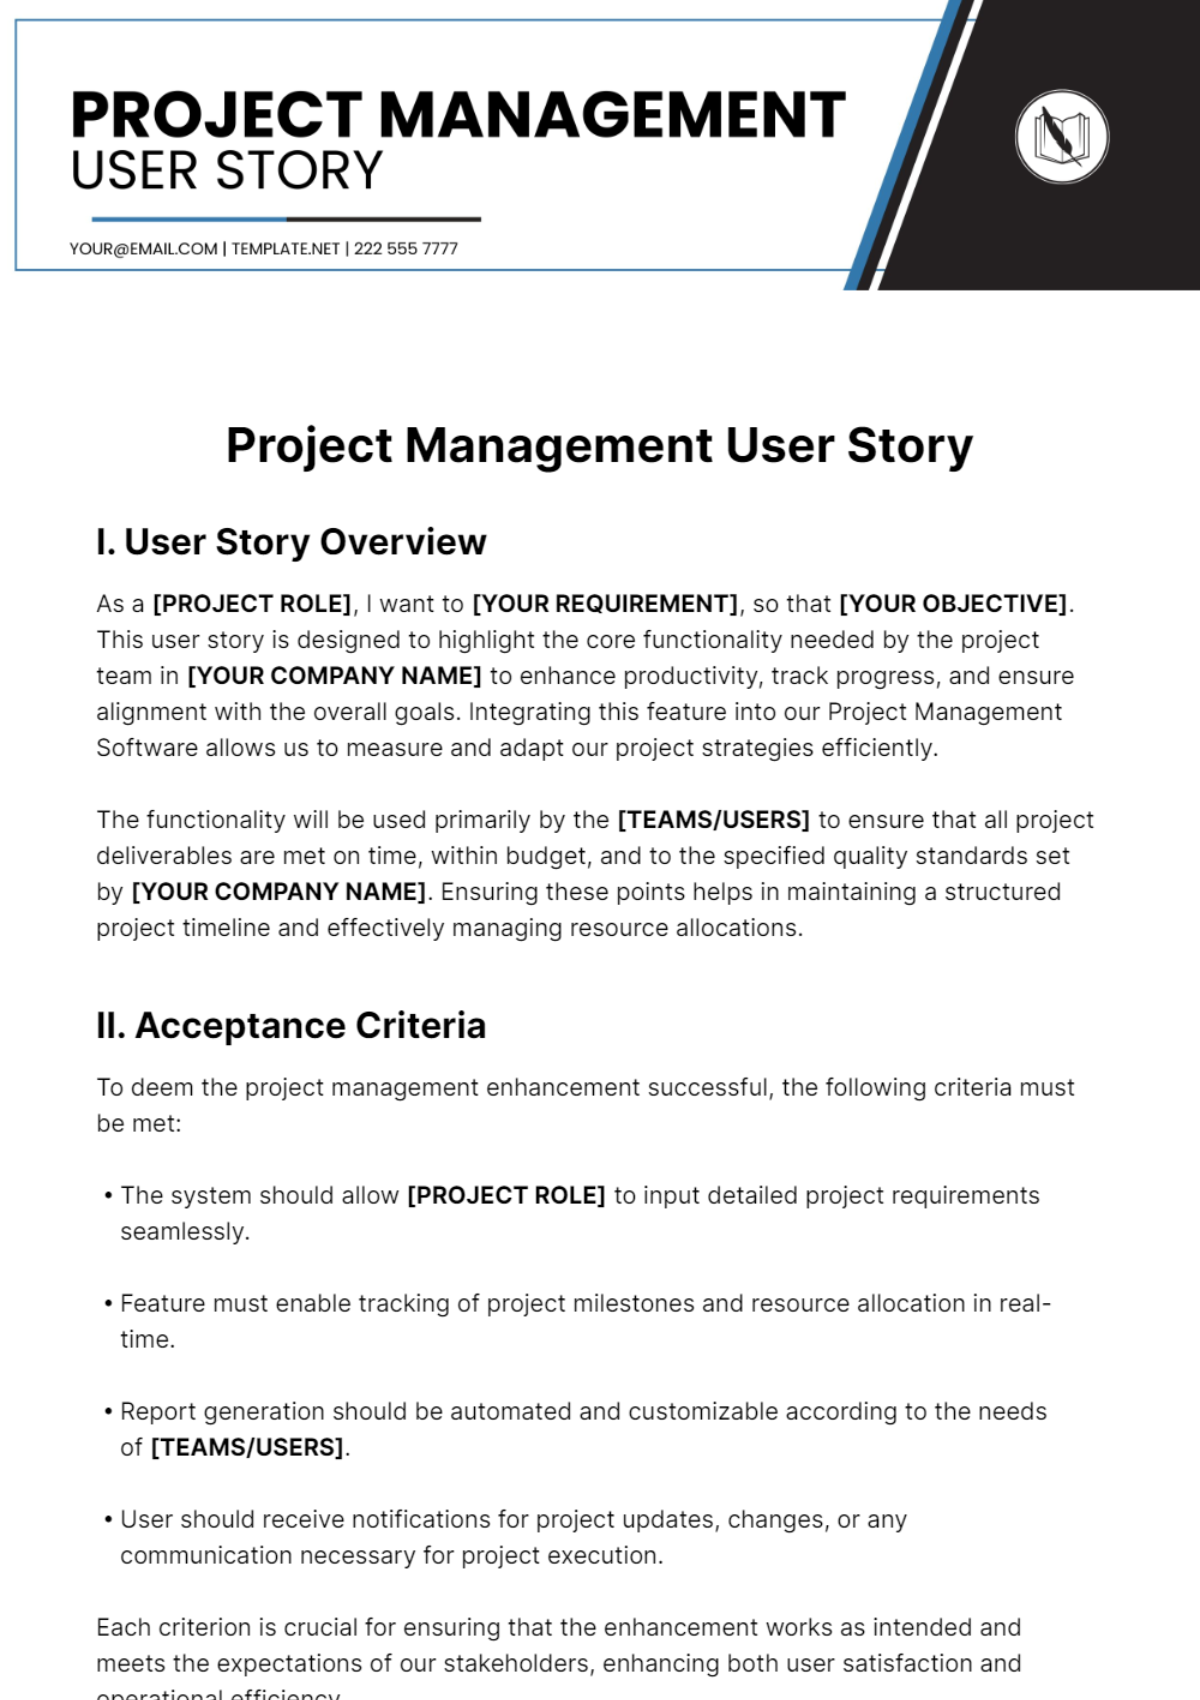 Project Management User Story Template